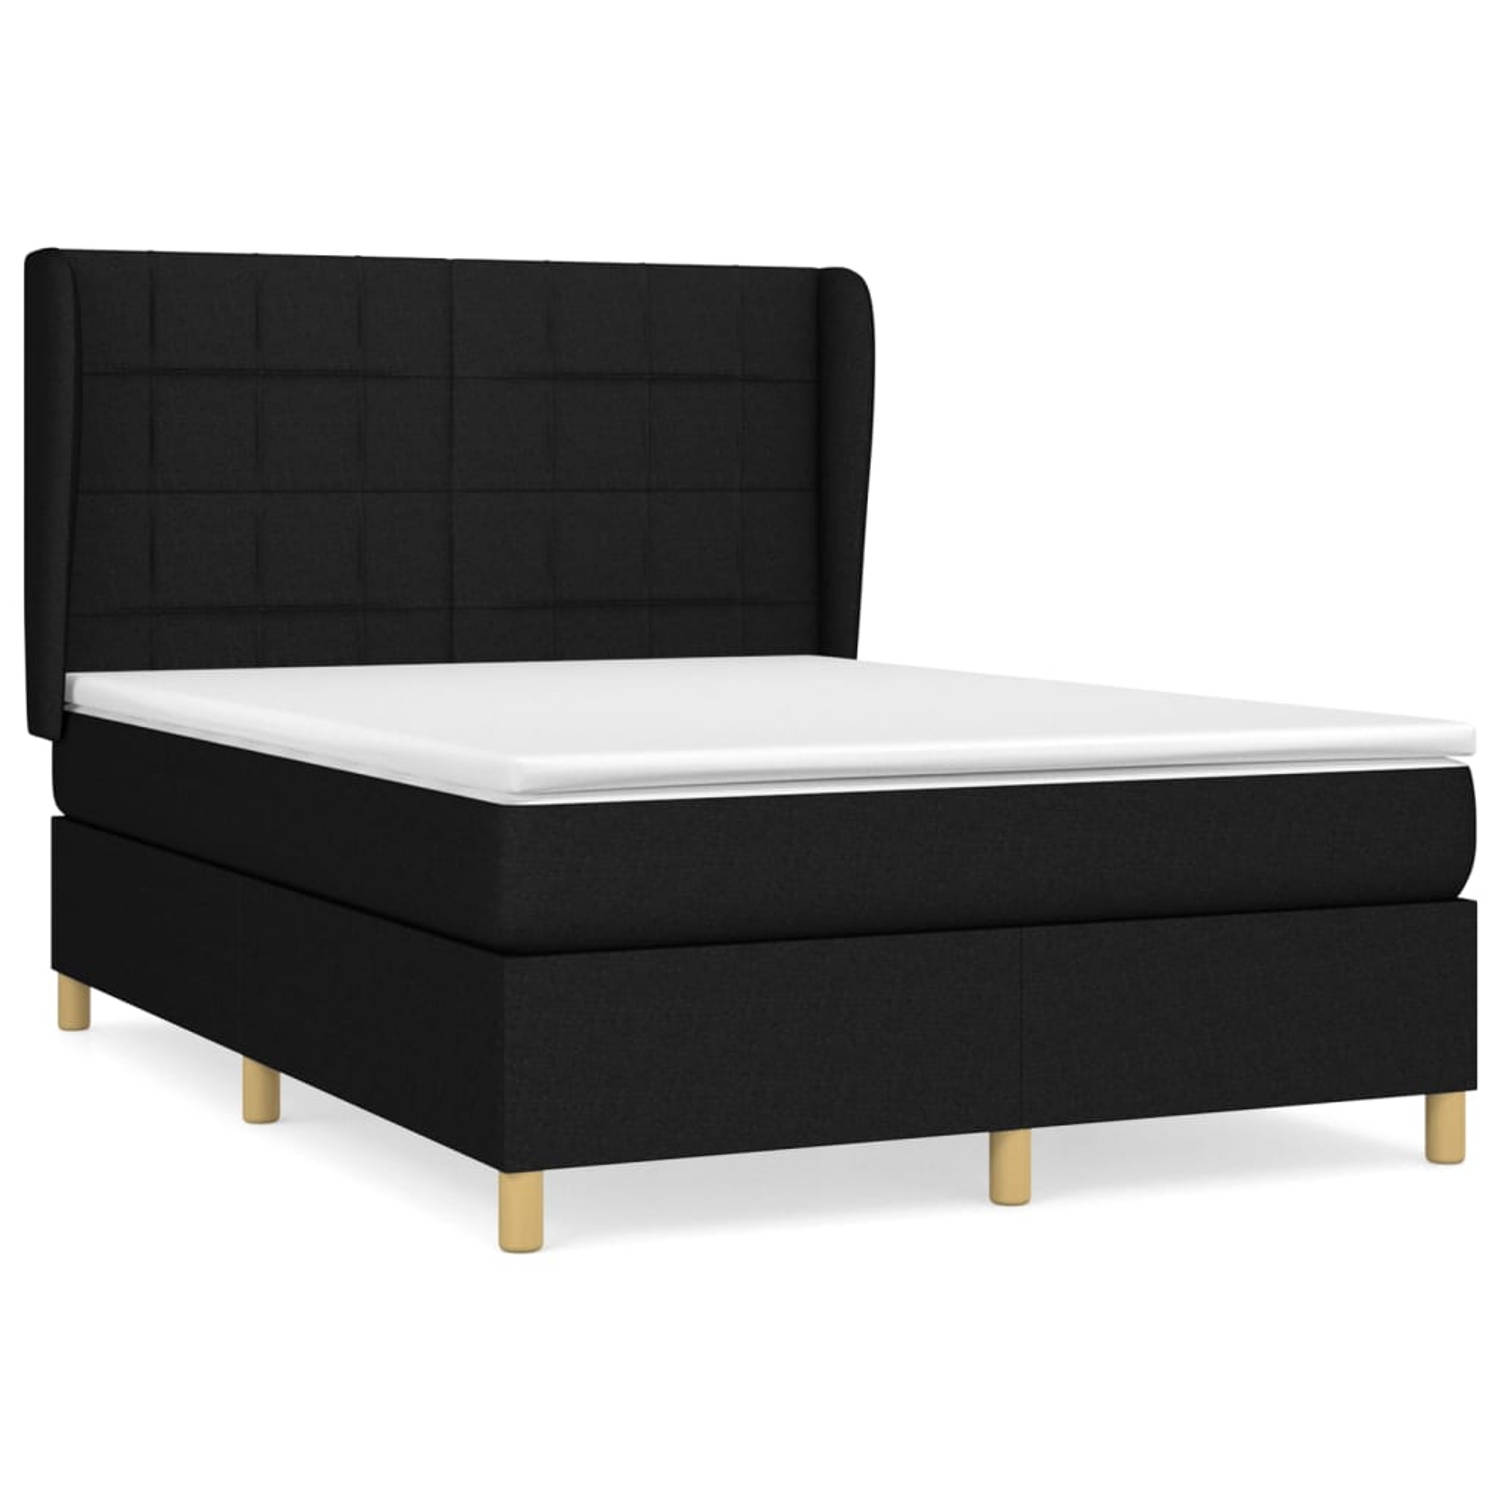 The Living Store Boxspringbed - Comfort - Bed - 203x147x118/128 cm - Zwart